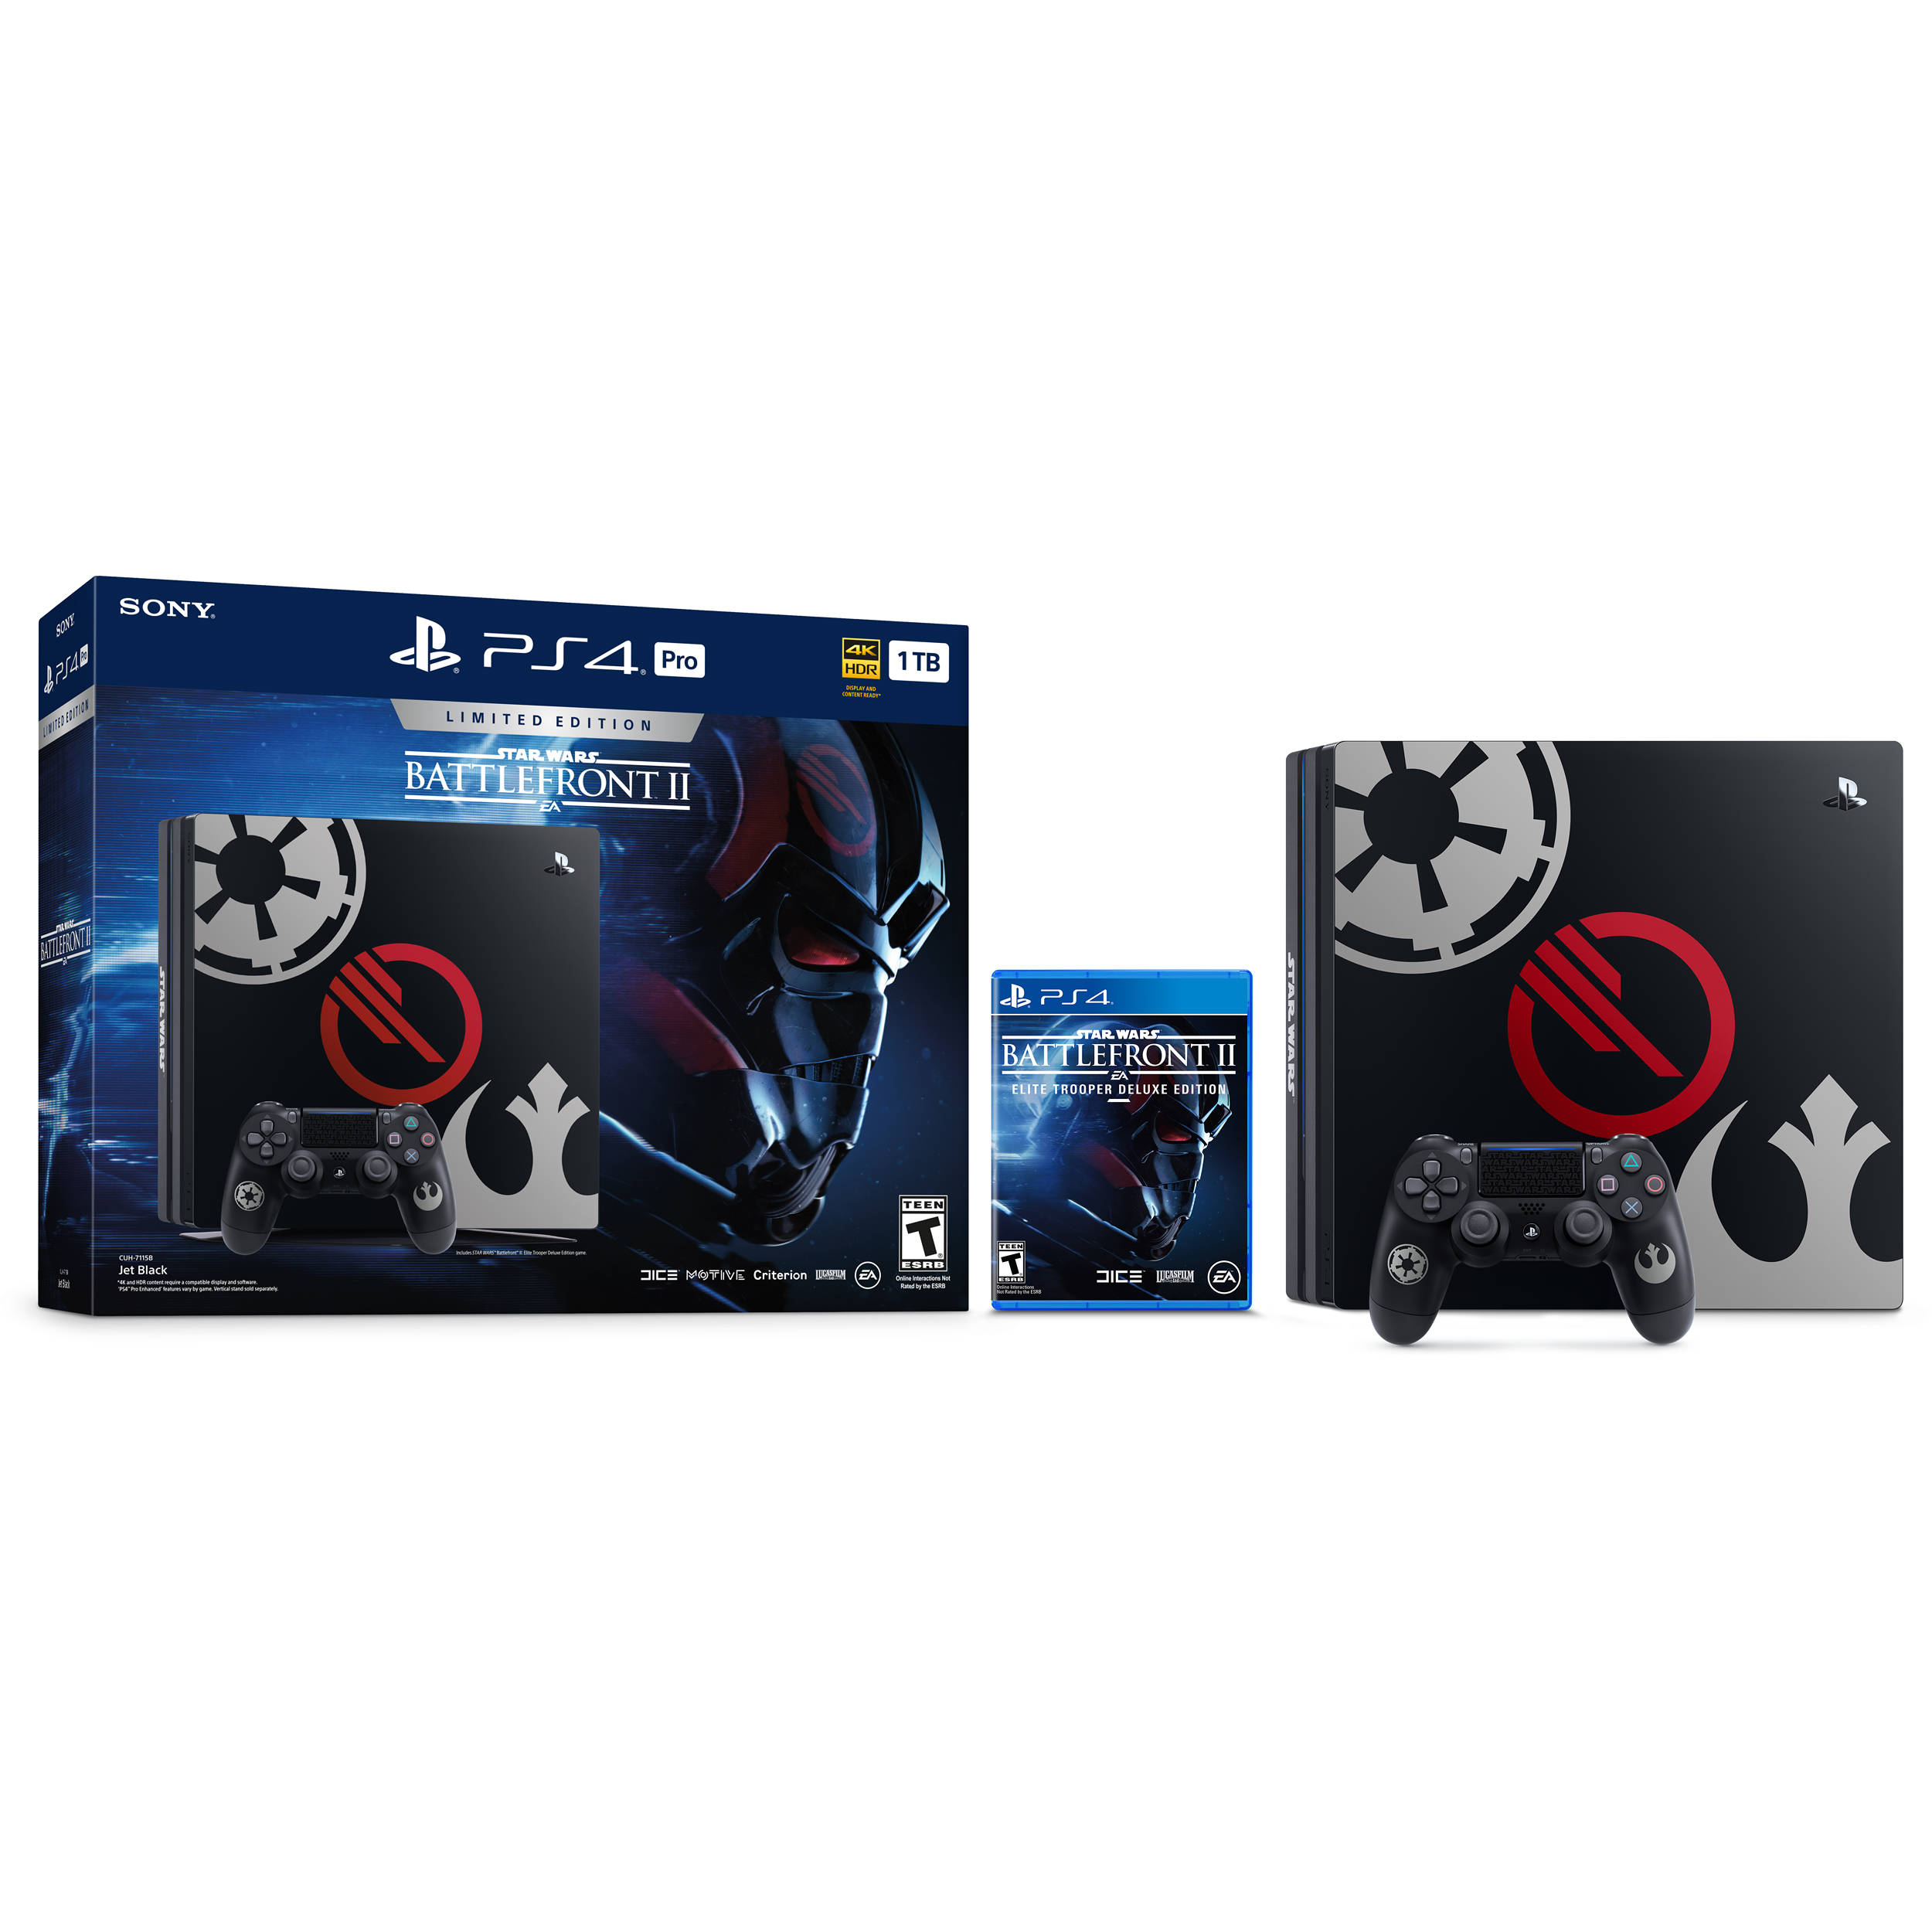 star wars limited edition ps4